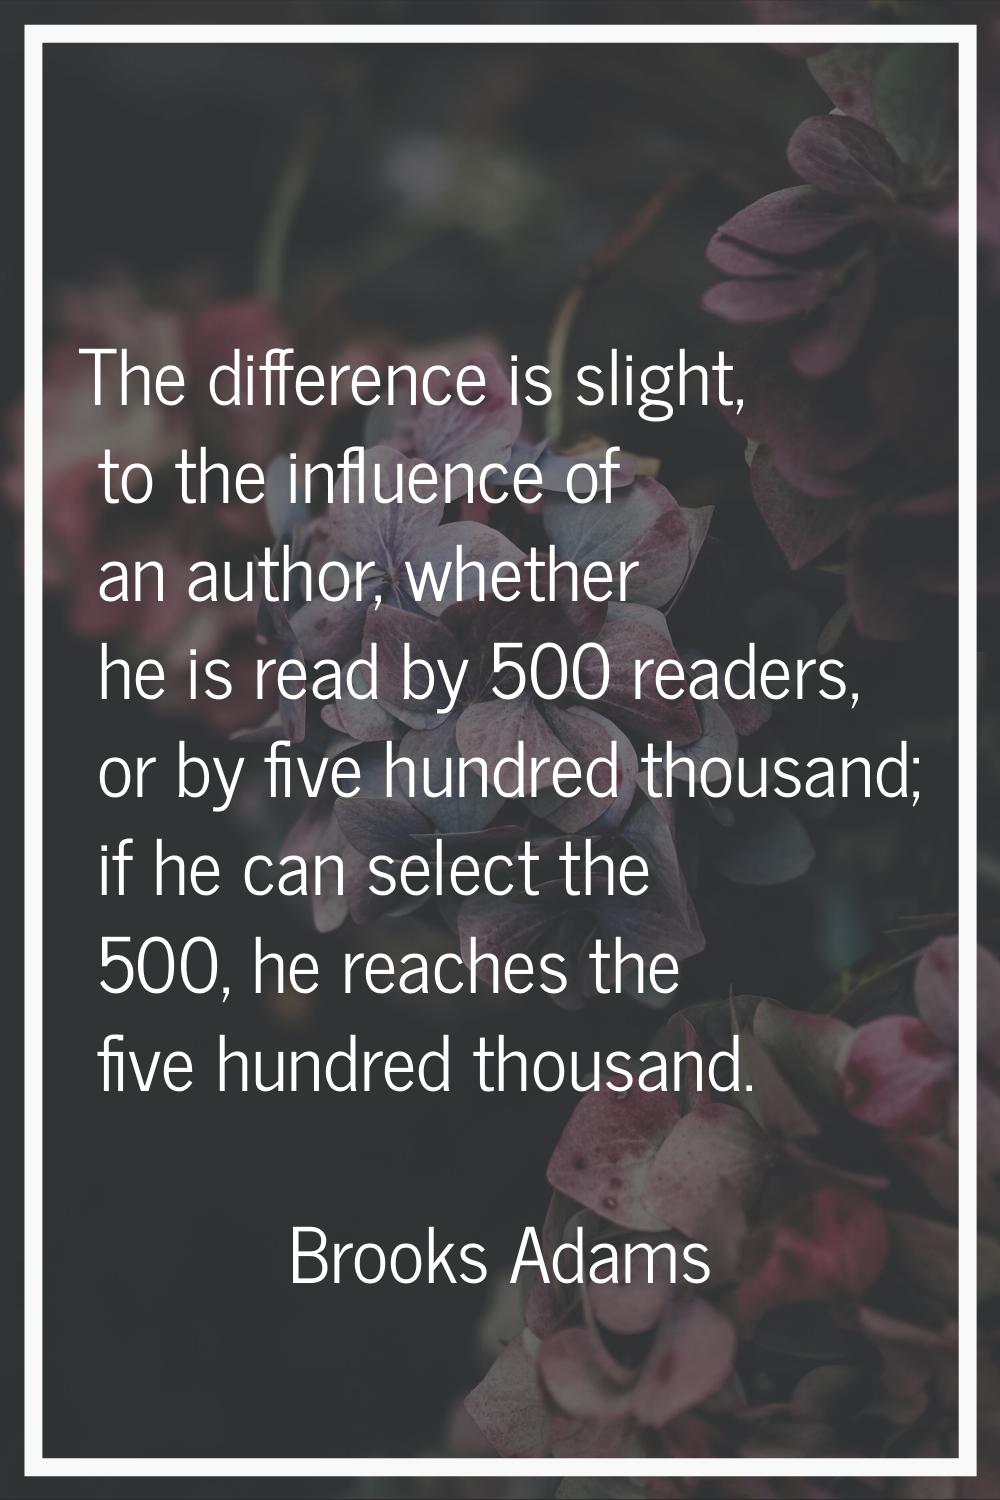 The difference is slight, to the influence of an author, whether he is read by 500 readers, or by f